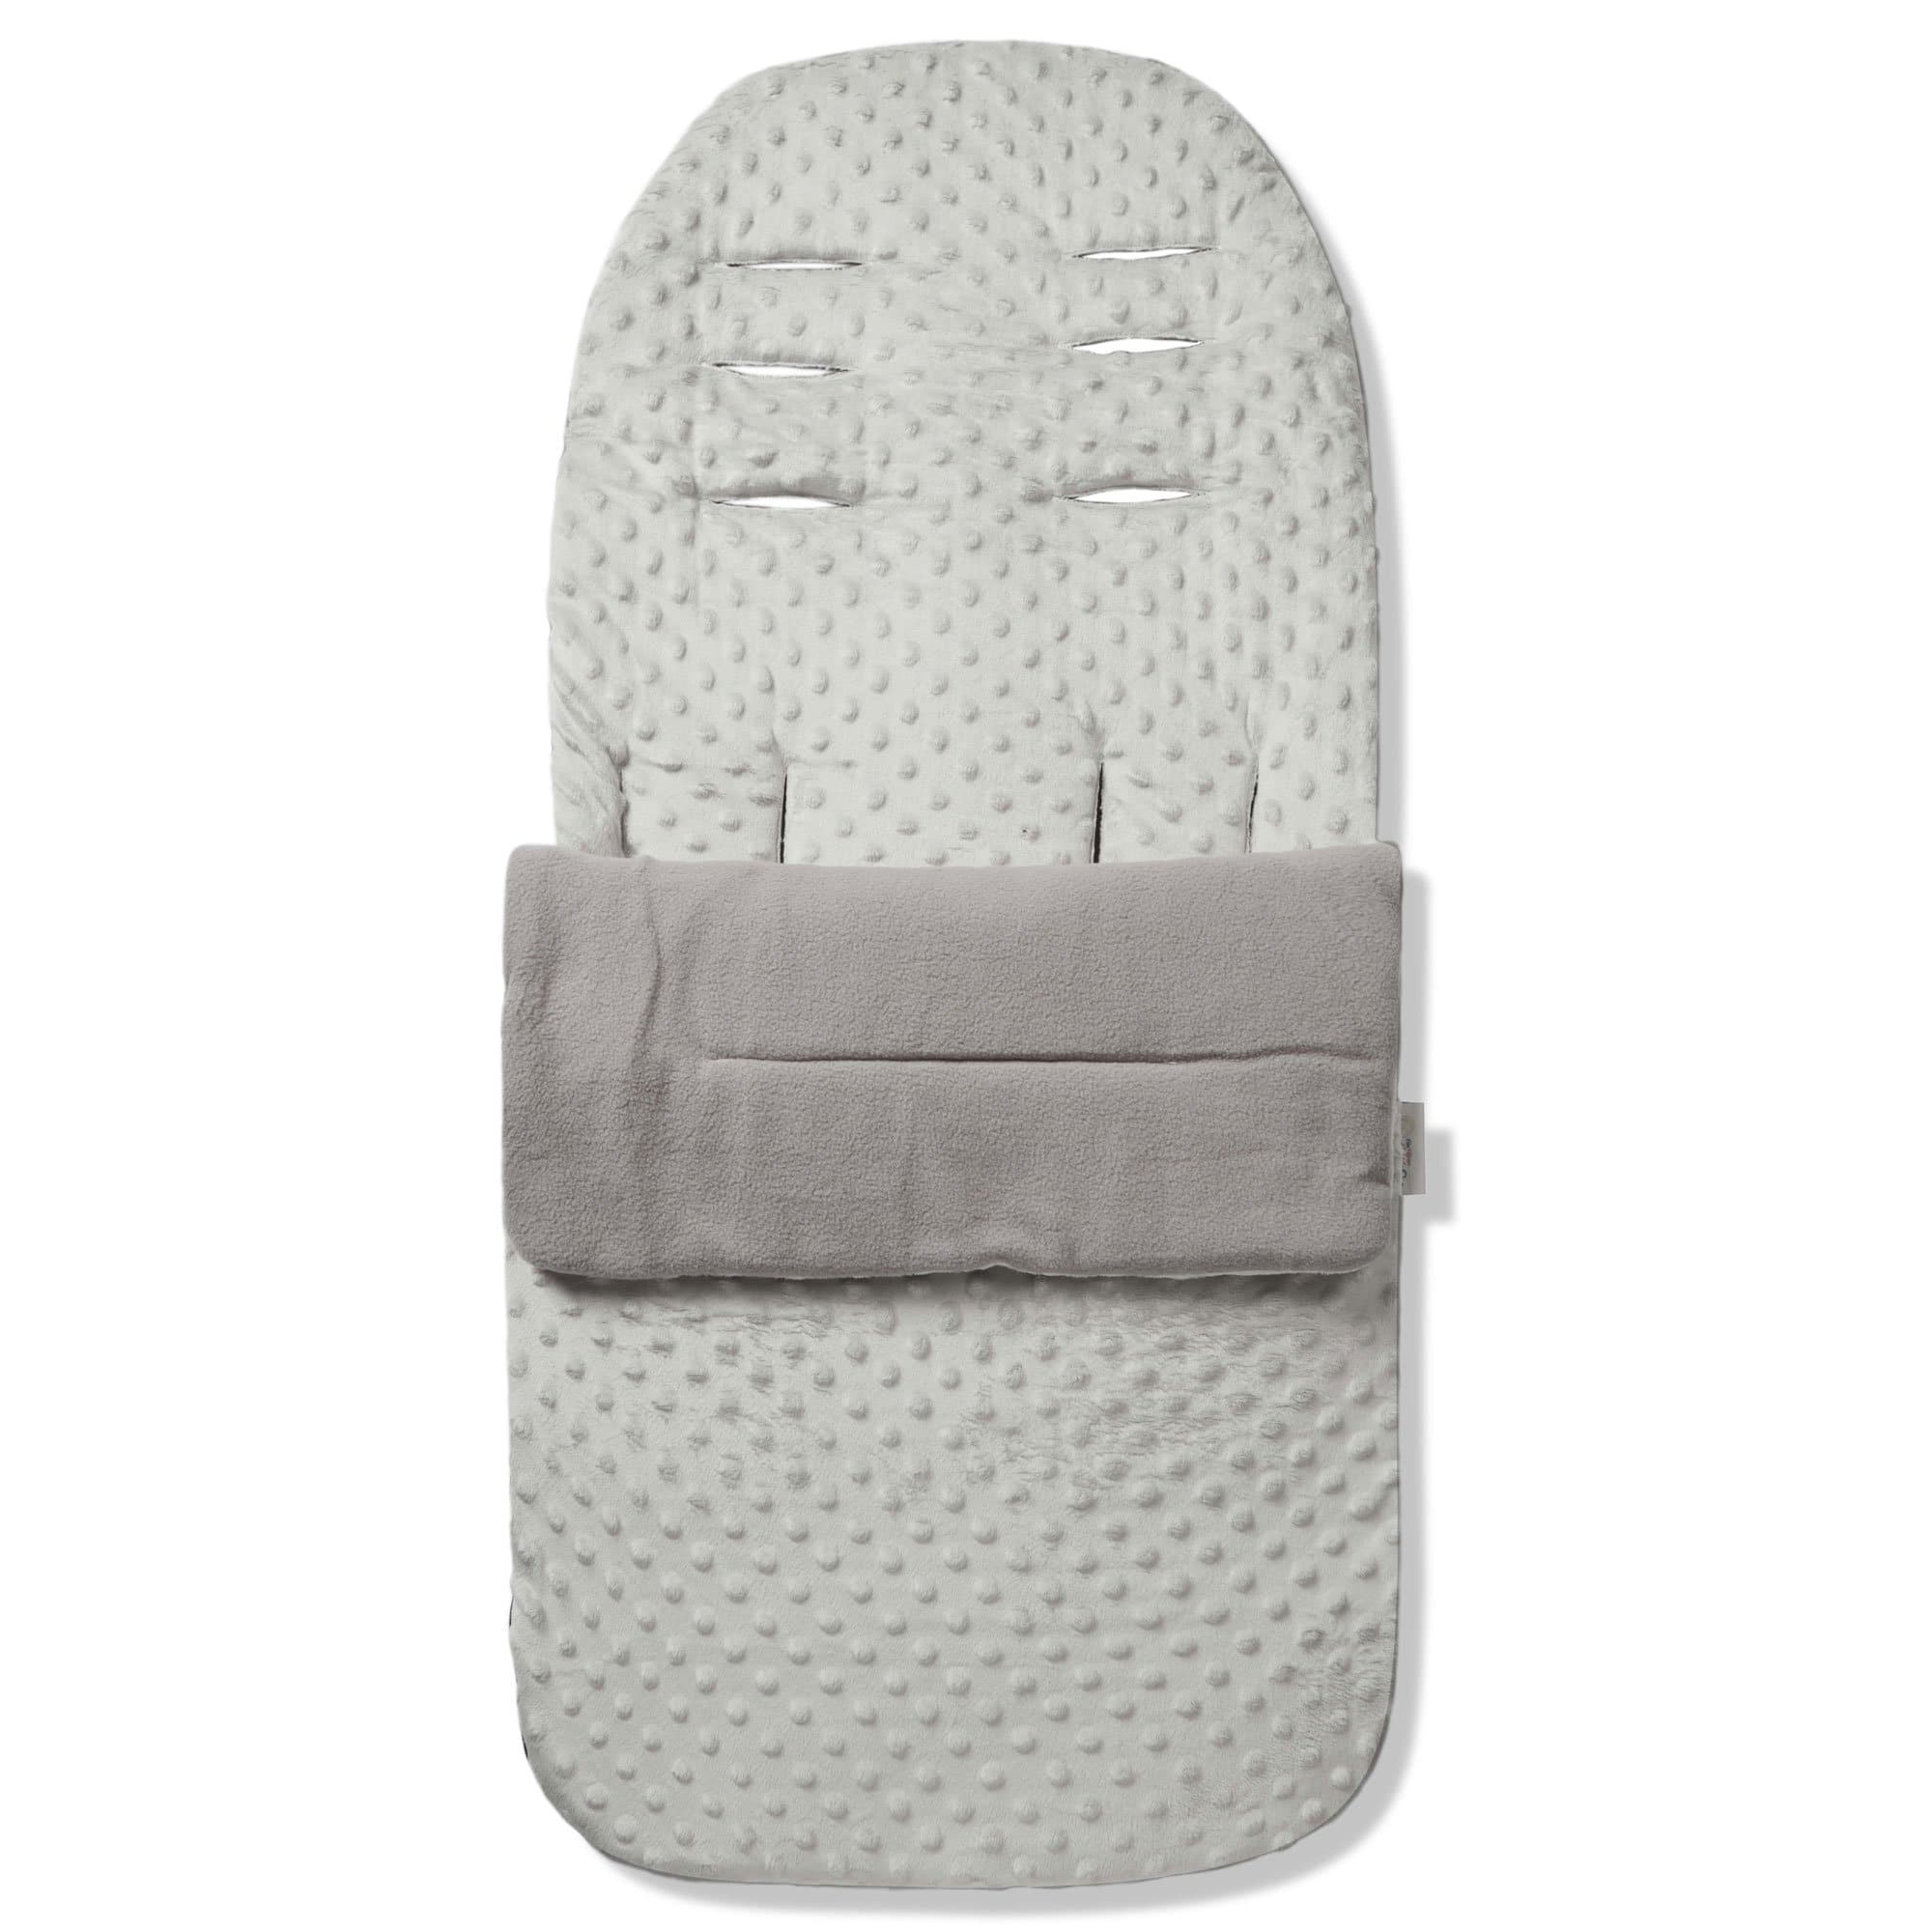 Dimple Footmuff / Cosy Toes Compatible with Cam - Grey / Fits All Models | For Your Little One